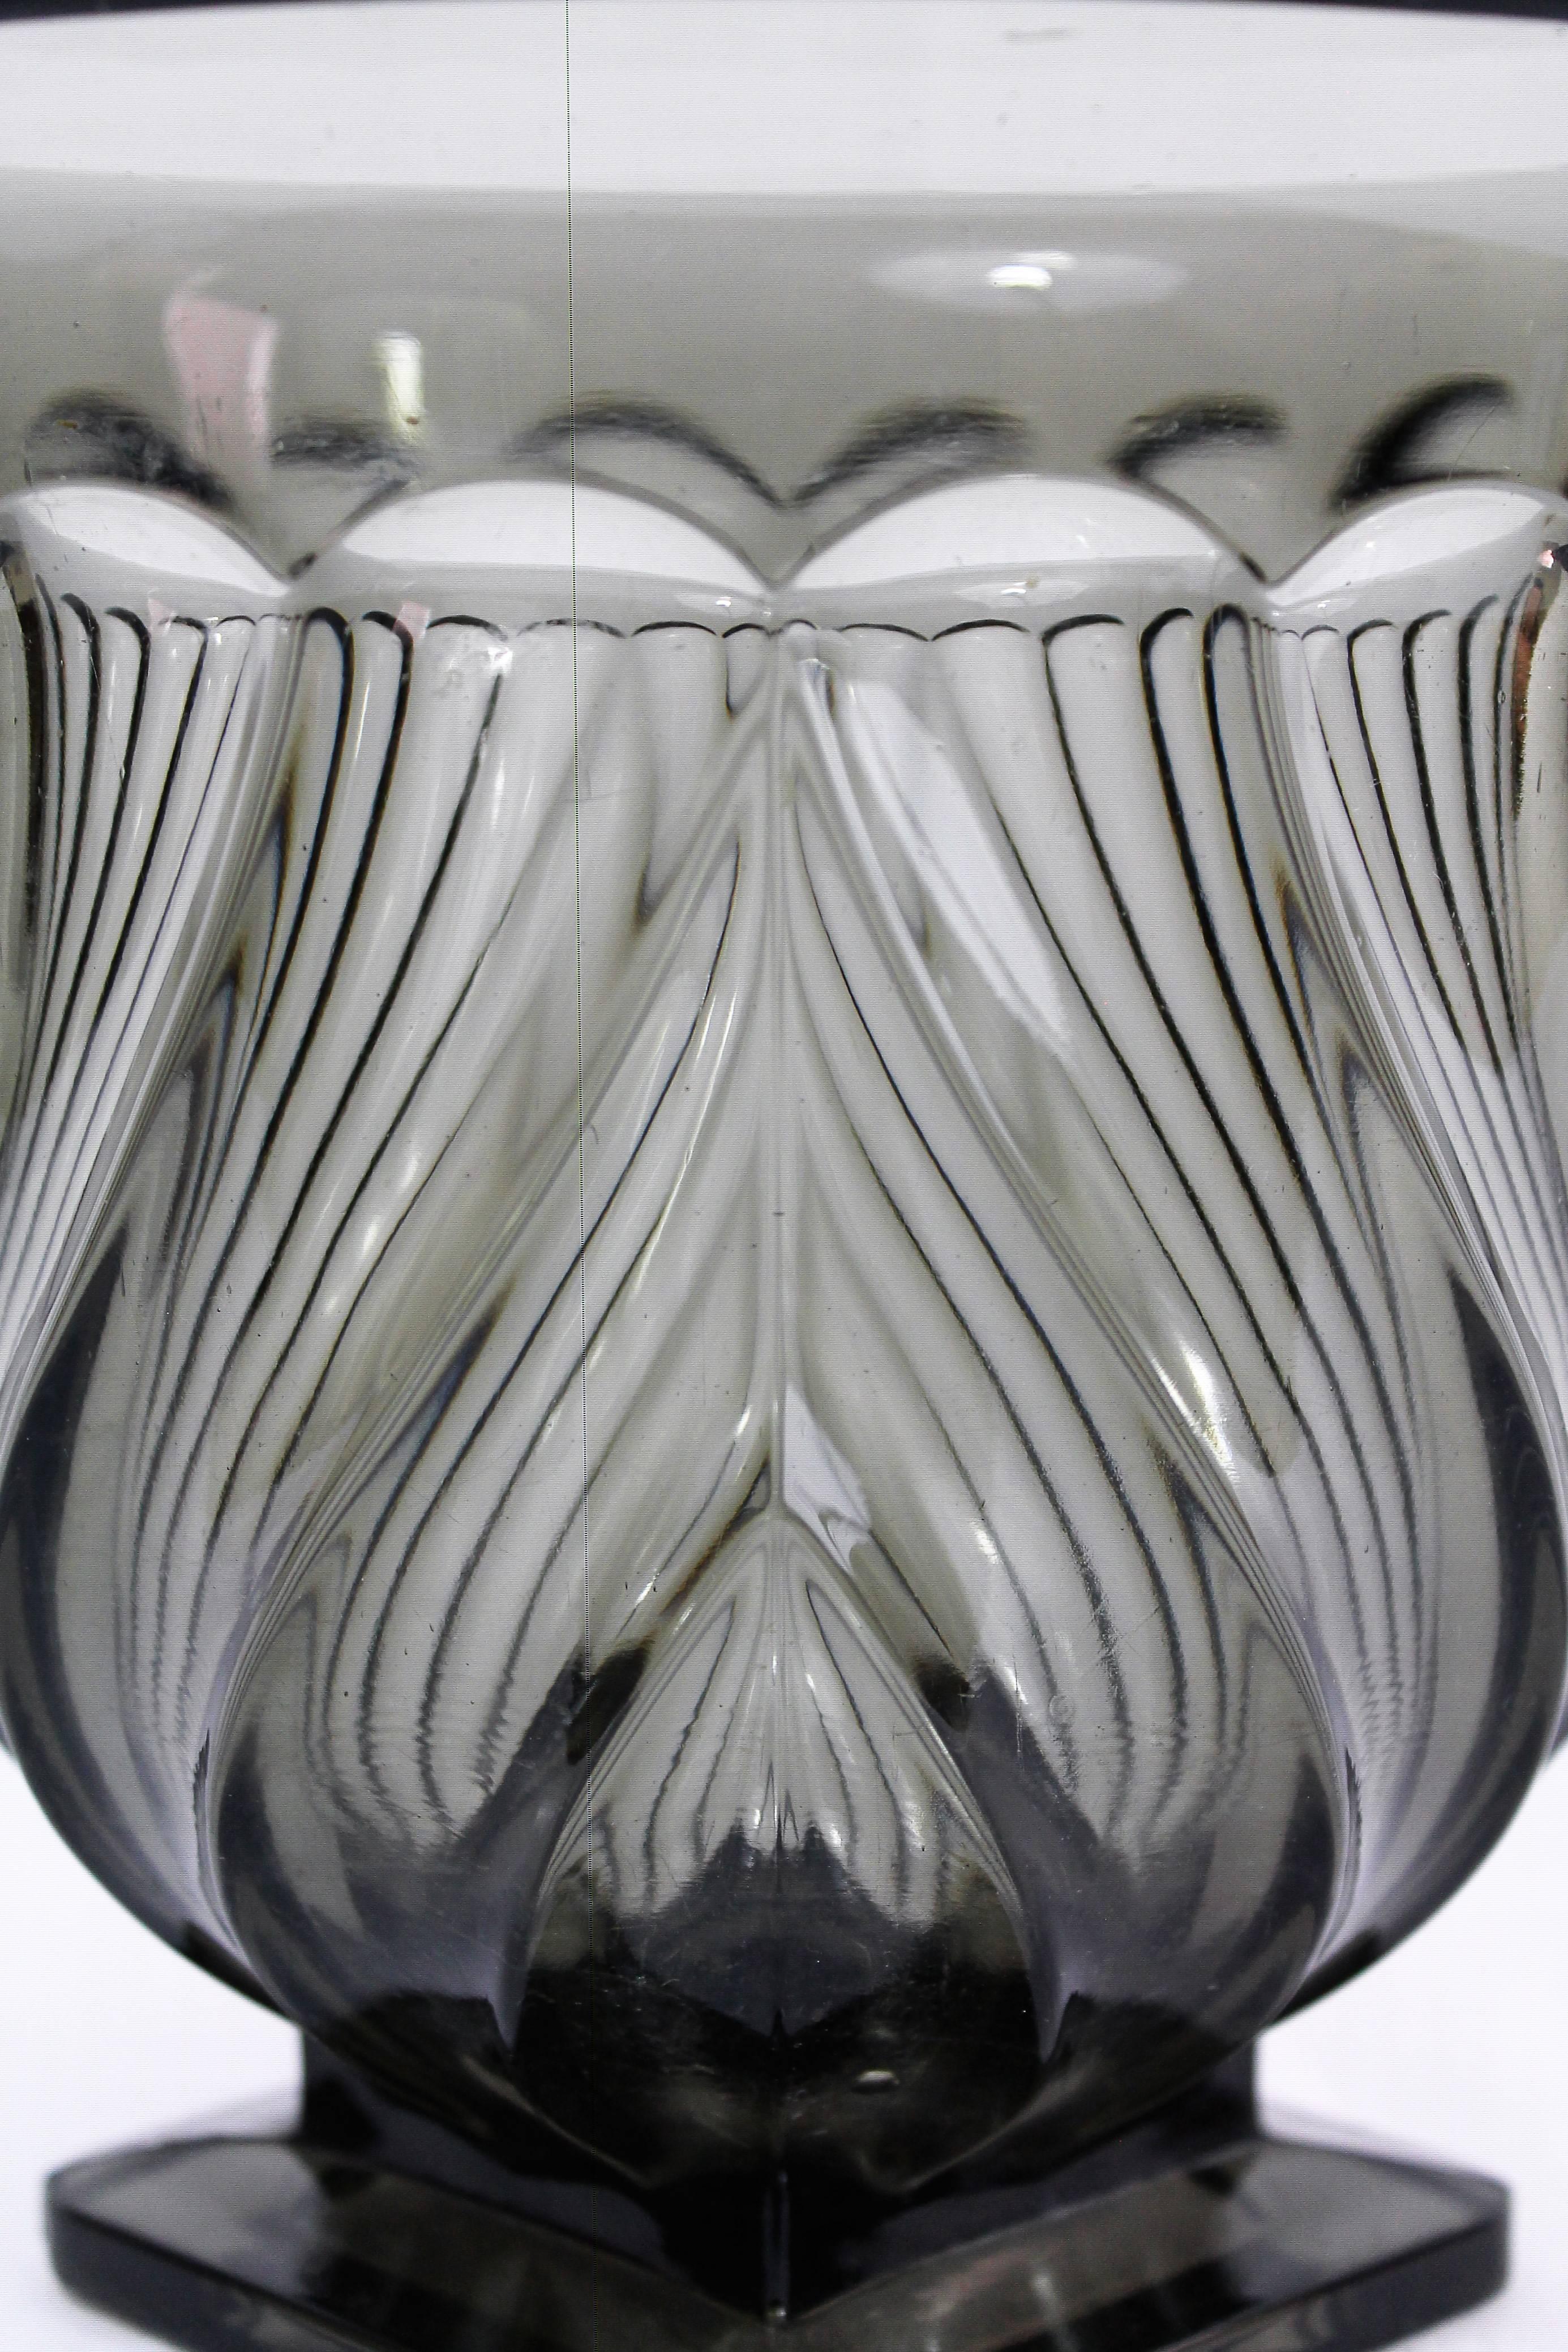 Beautiful Art Deco style vase urn in smoked crystal on pedestal with decorating hearts.
Probably Murano.
1940-1950s.